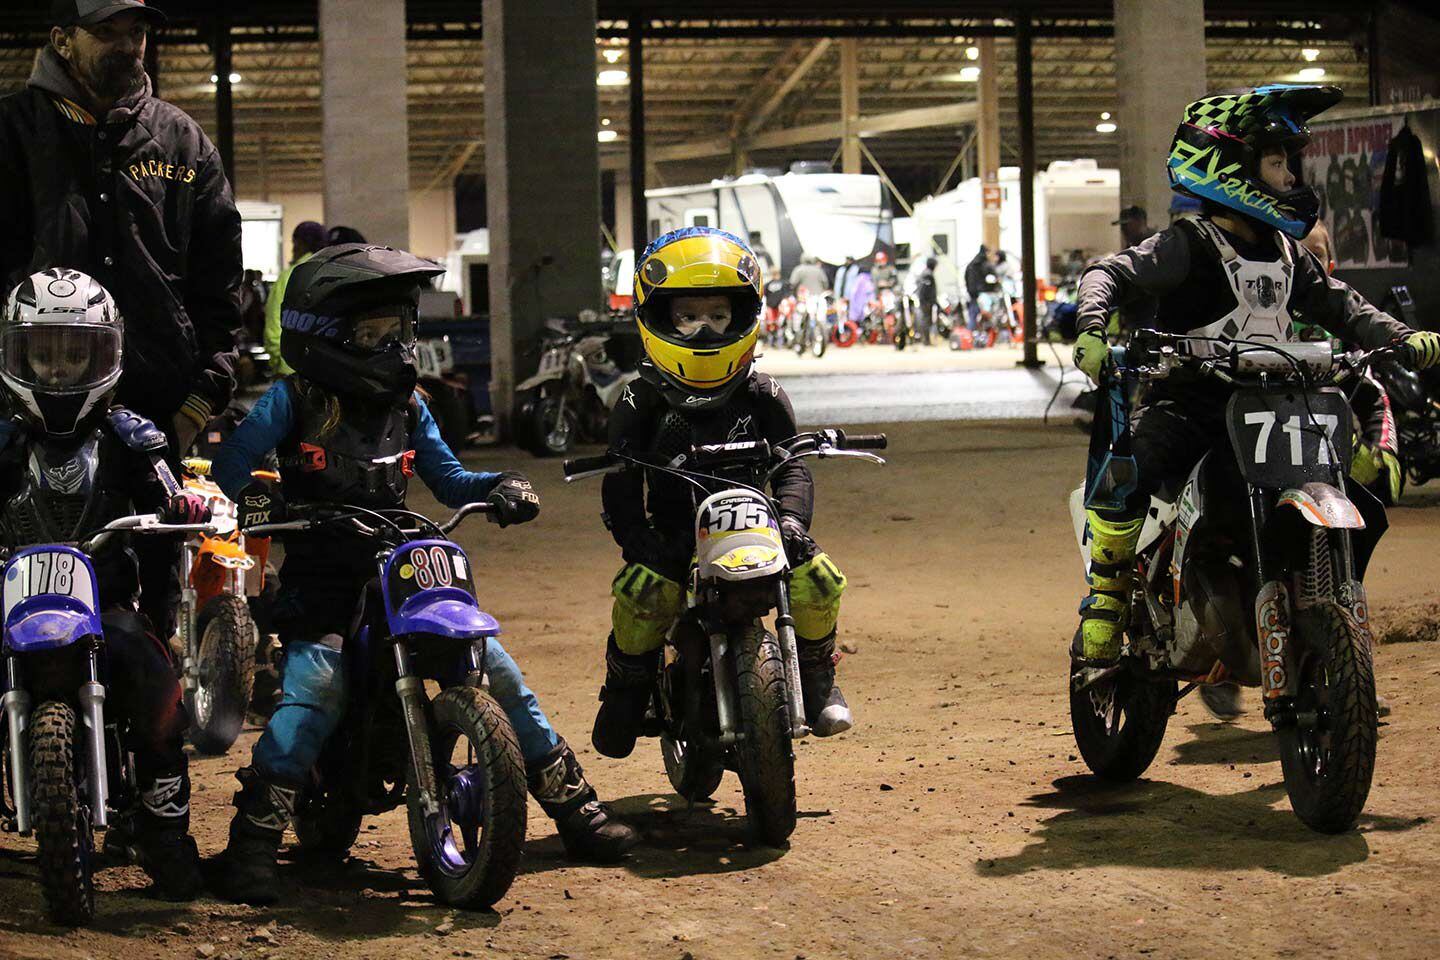 It was a family affair at the Cherry City Classic flat-track races as champions of tomorrow anxiously waited for their turn to spin fast laps.